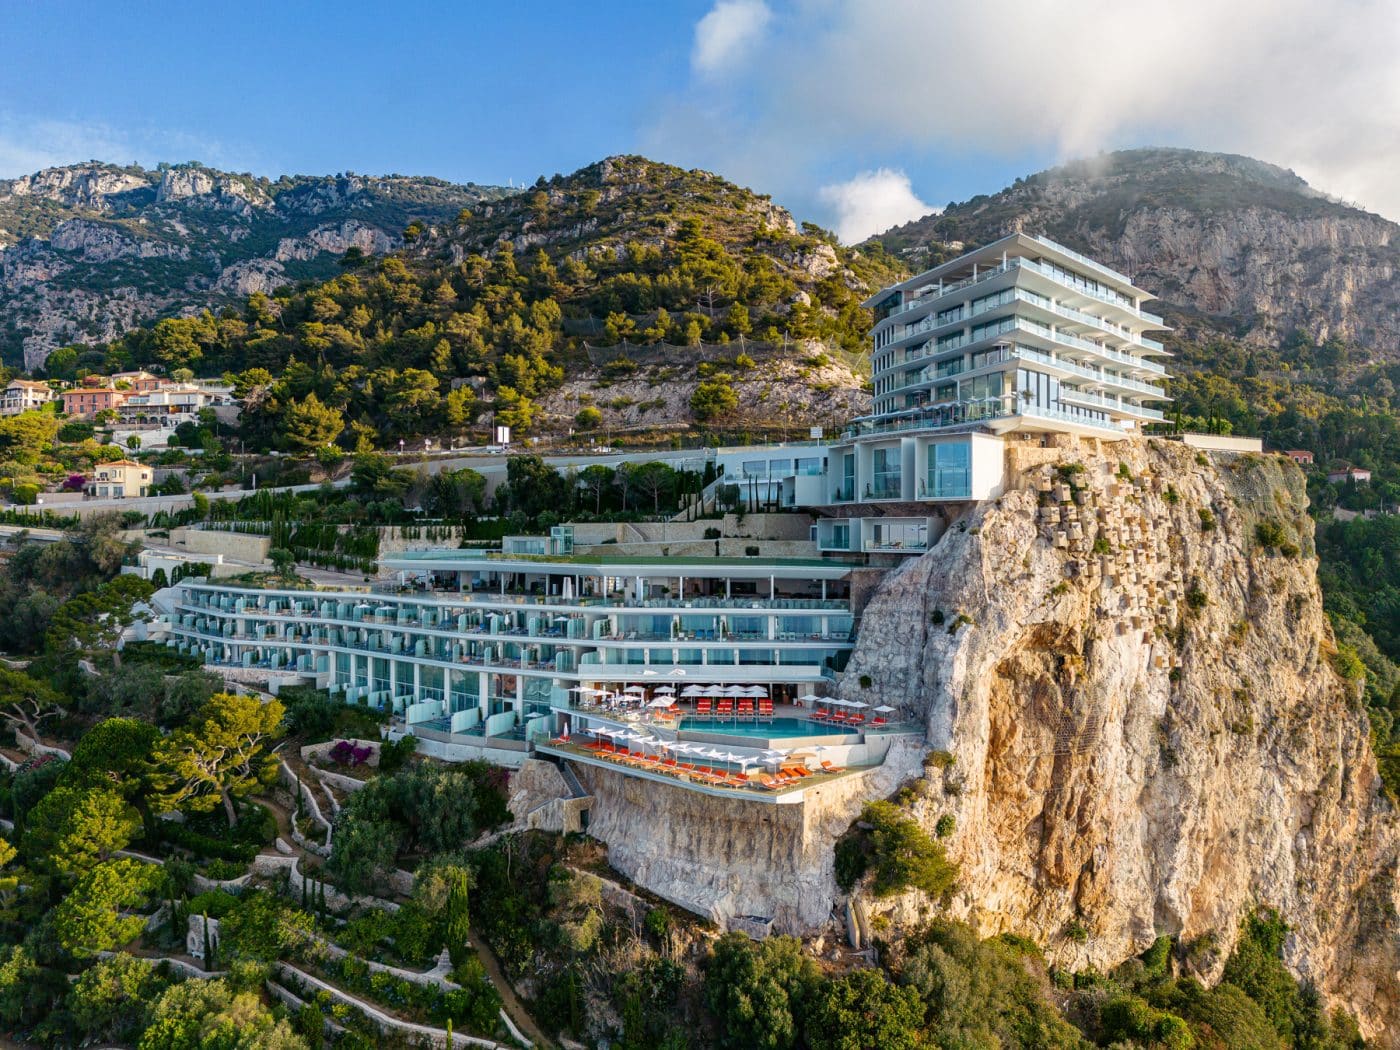 The Maybourne Riviera sits atop rocky peninsula above the picturesque French town of Roquebrune-Cap-Martin. Architect Jean-Michel Wilmotte's undulating, modernist exterior takes inspiration from LE CORBUSIER.